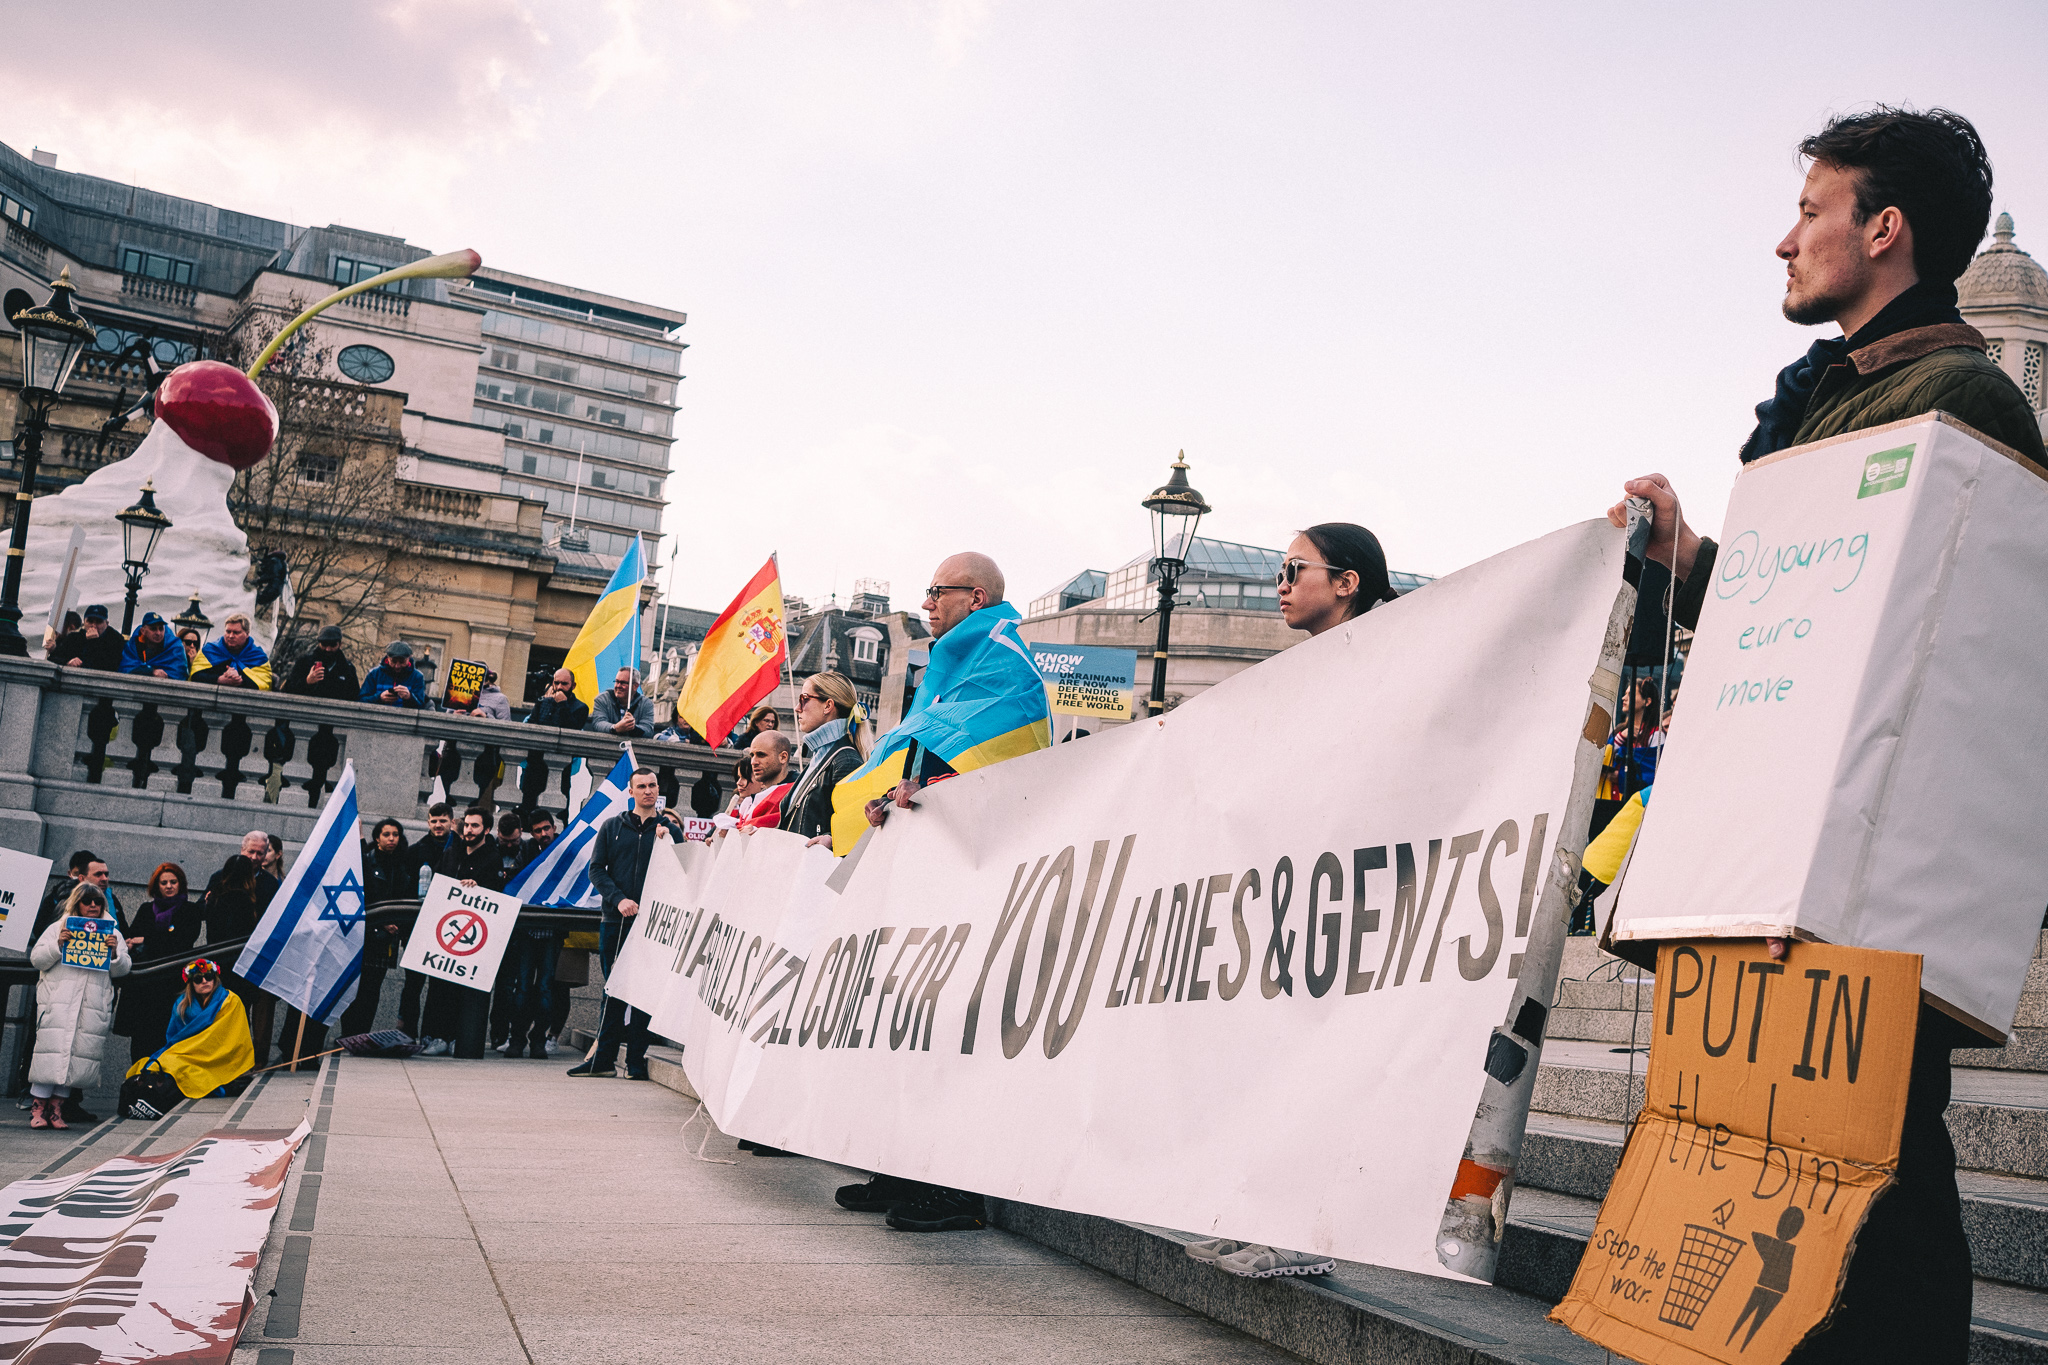 A group of protesters at the rally to support Ukraine at Trafalgar Square holding sings and banners